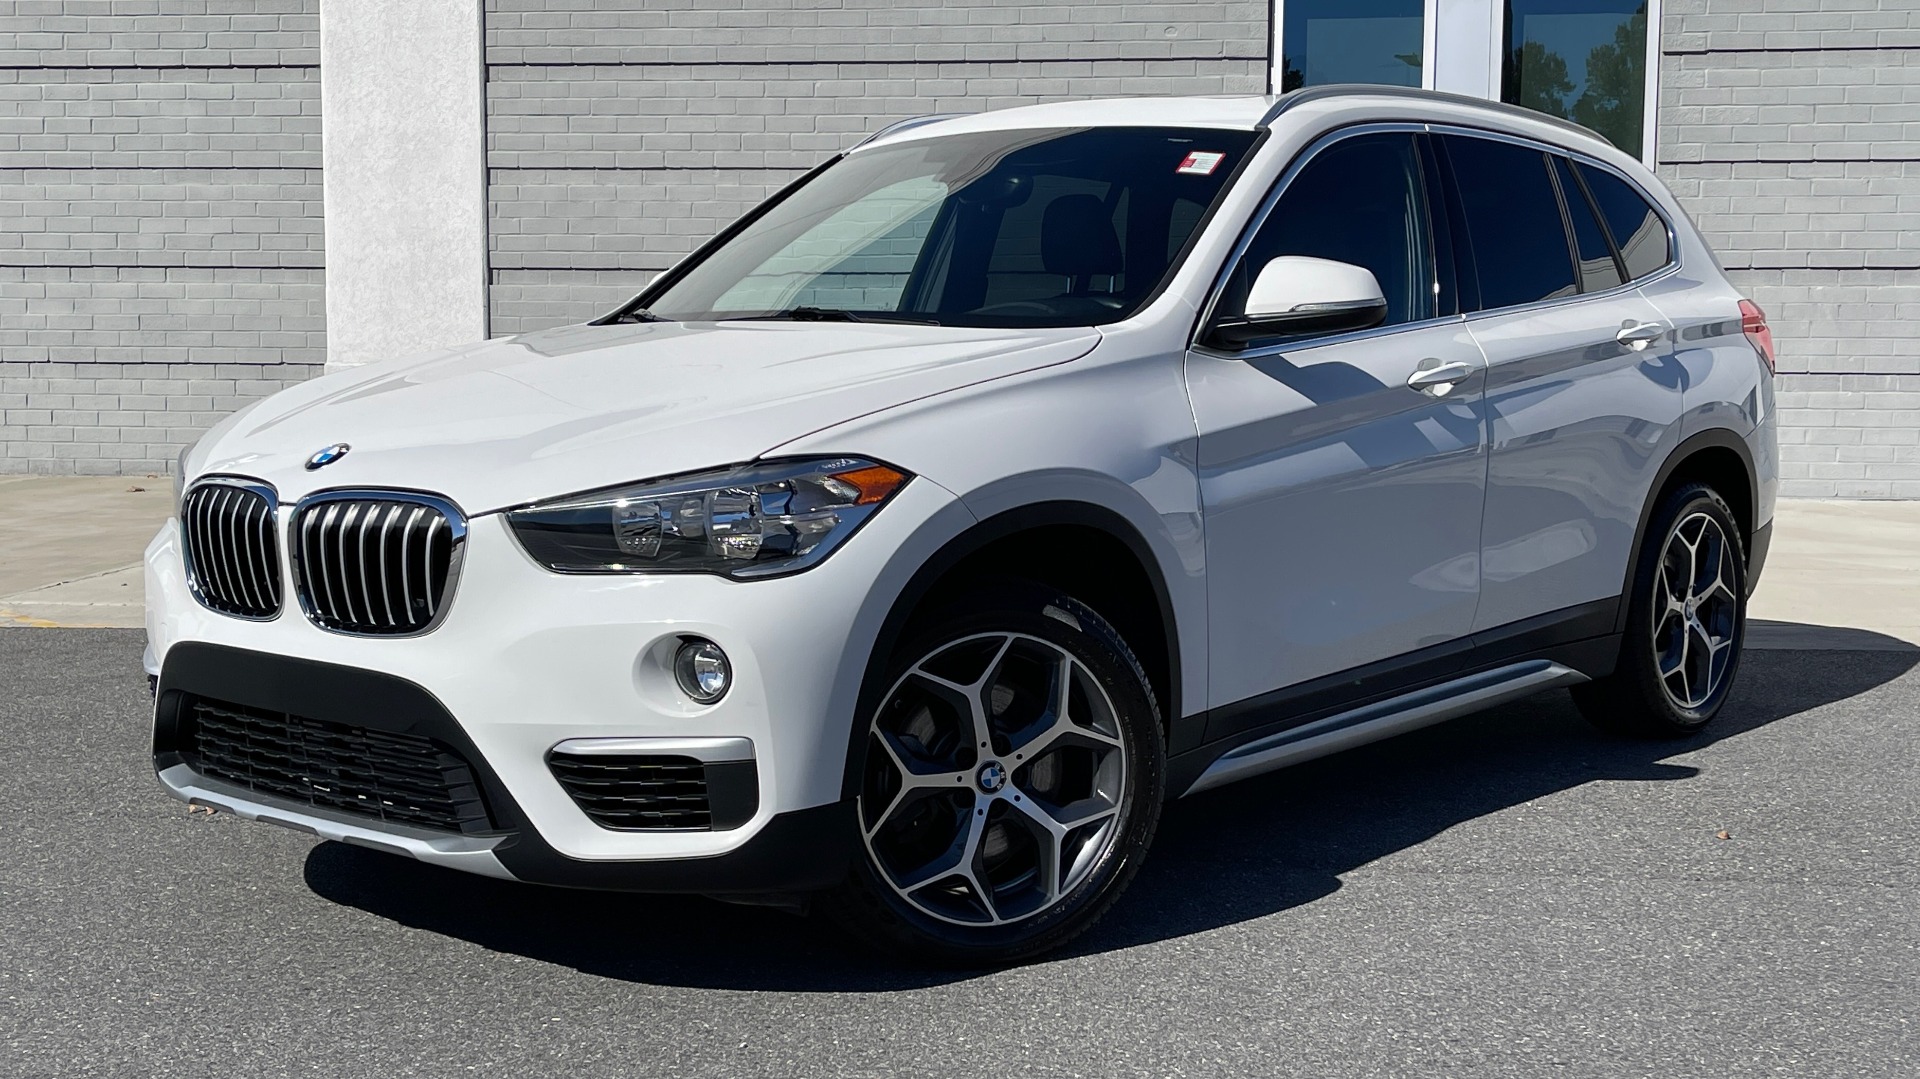 Used 2018 BMW X1 XDRIVE28I 2.0L / CONVENIENCE PKG / PANO-ROOF / REARVIEW for sale Sold at Formula Imports in Charlotte NC 28227 1